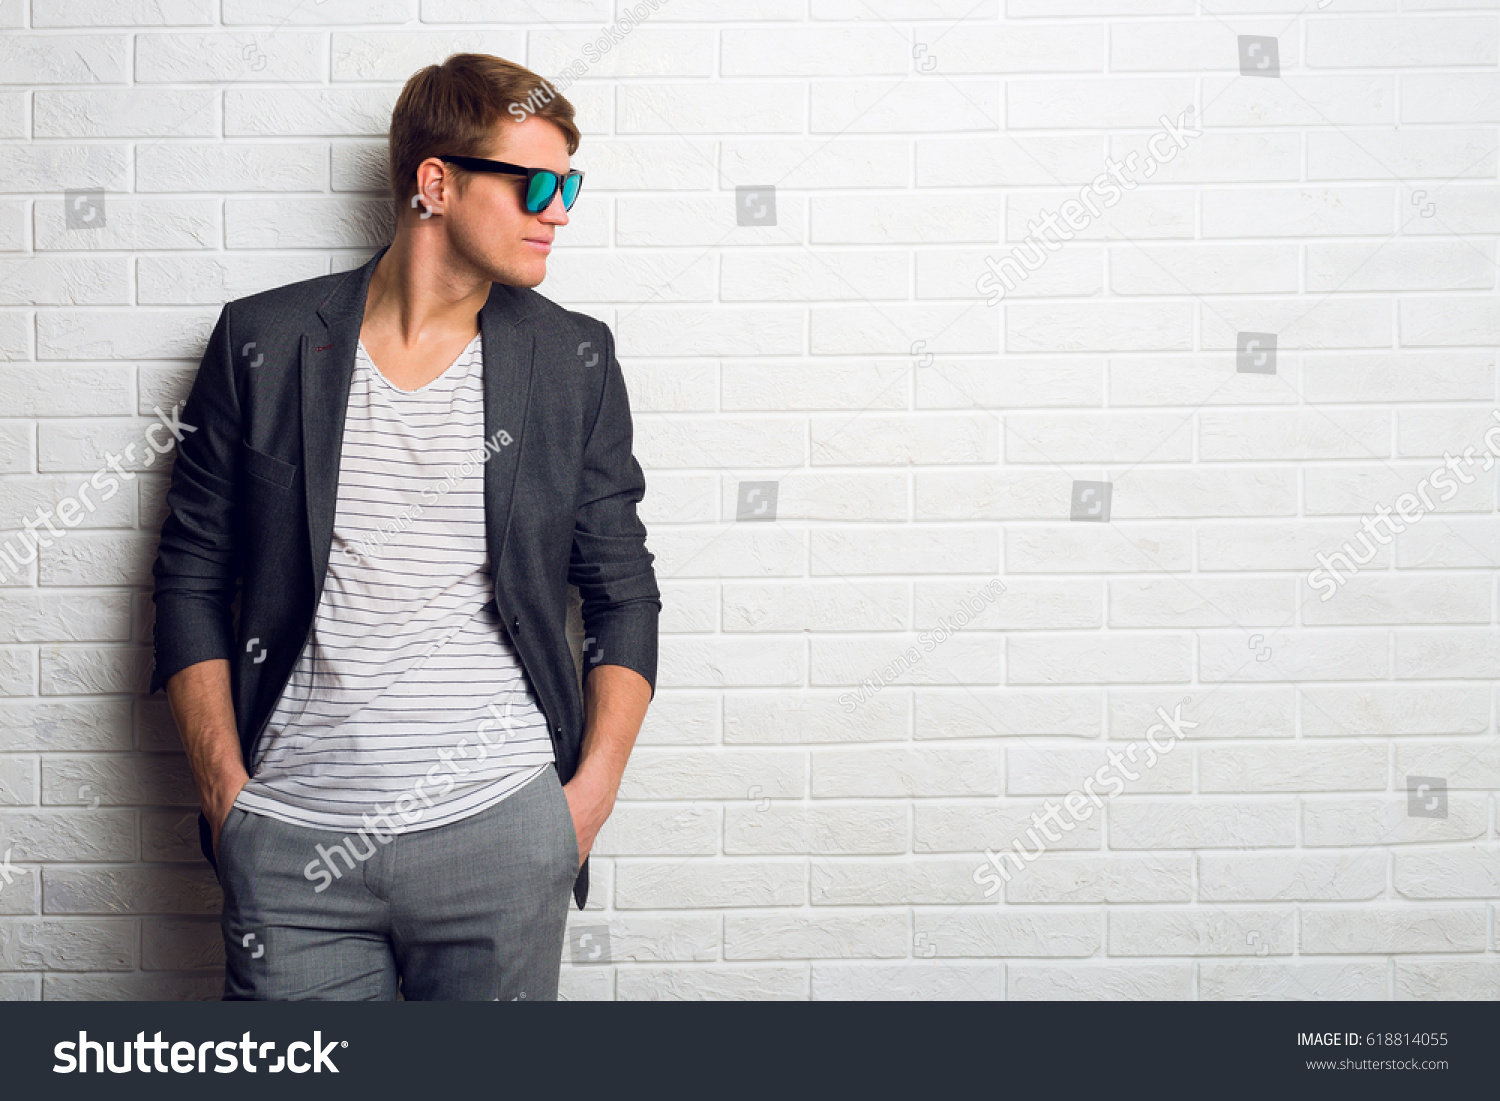 Happy  young business man in   trendy casual jacket and sunglasses standing on white brick wall background. Space for text.  #618814055